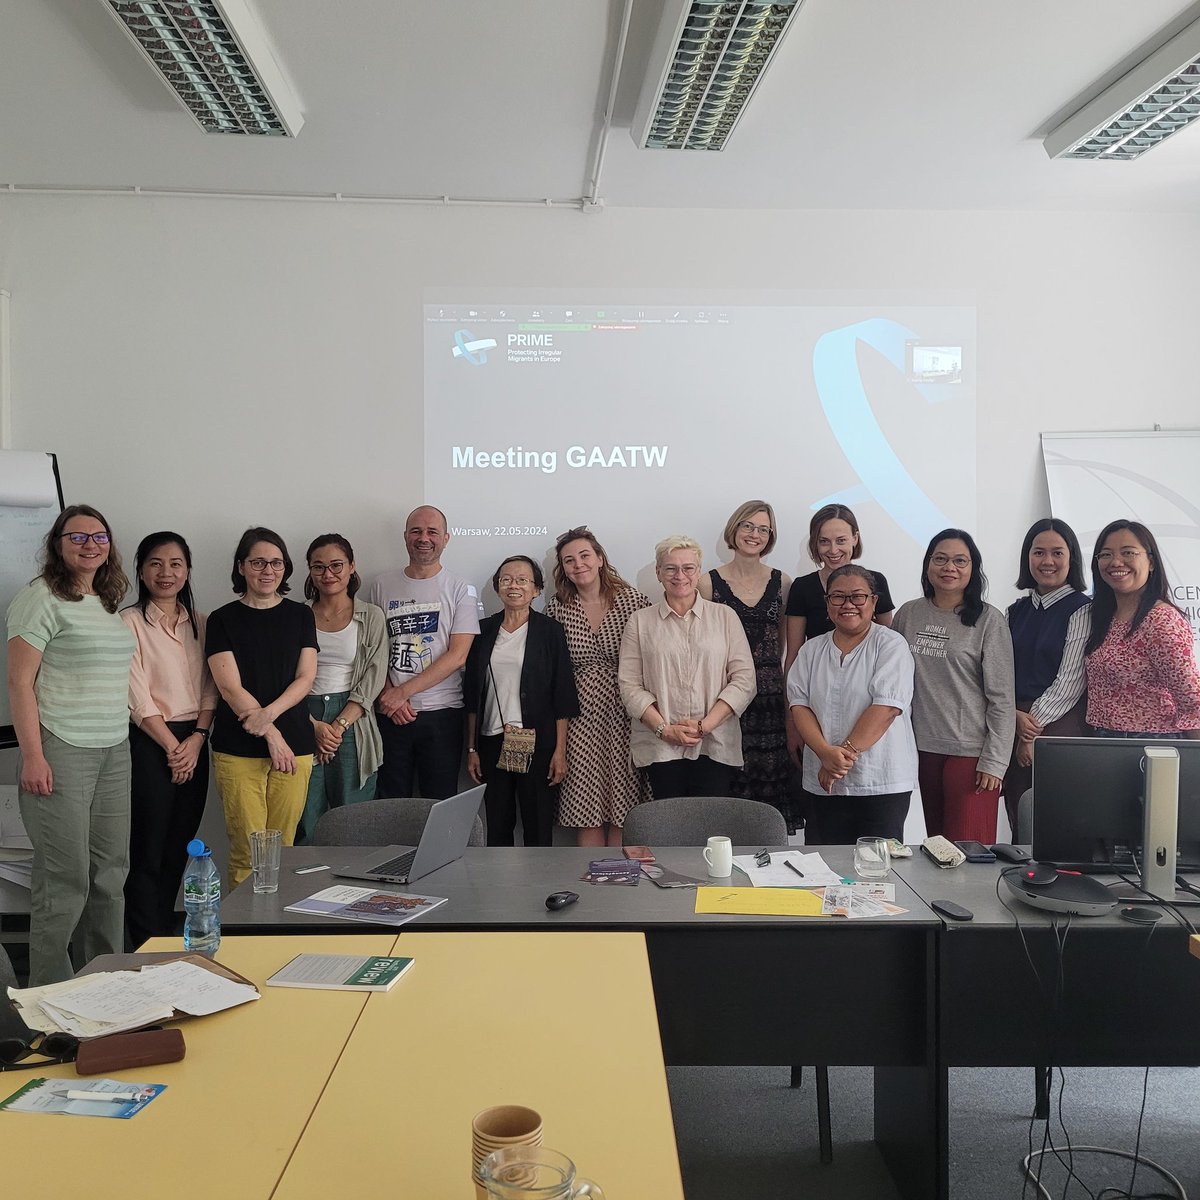 We hosted yesterday @CMR_Warsaw a big group from @GAATW_IS to discuss the importance of irregular migrants protection #PRIMEprojectEU. Thank you for the great meeting!